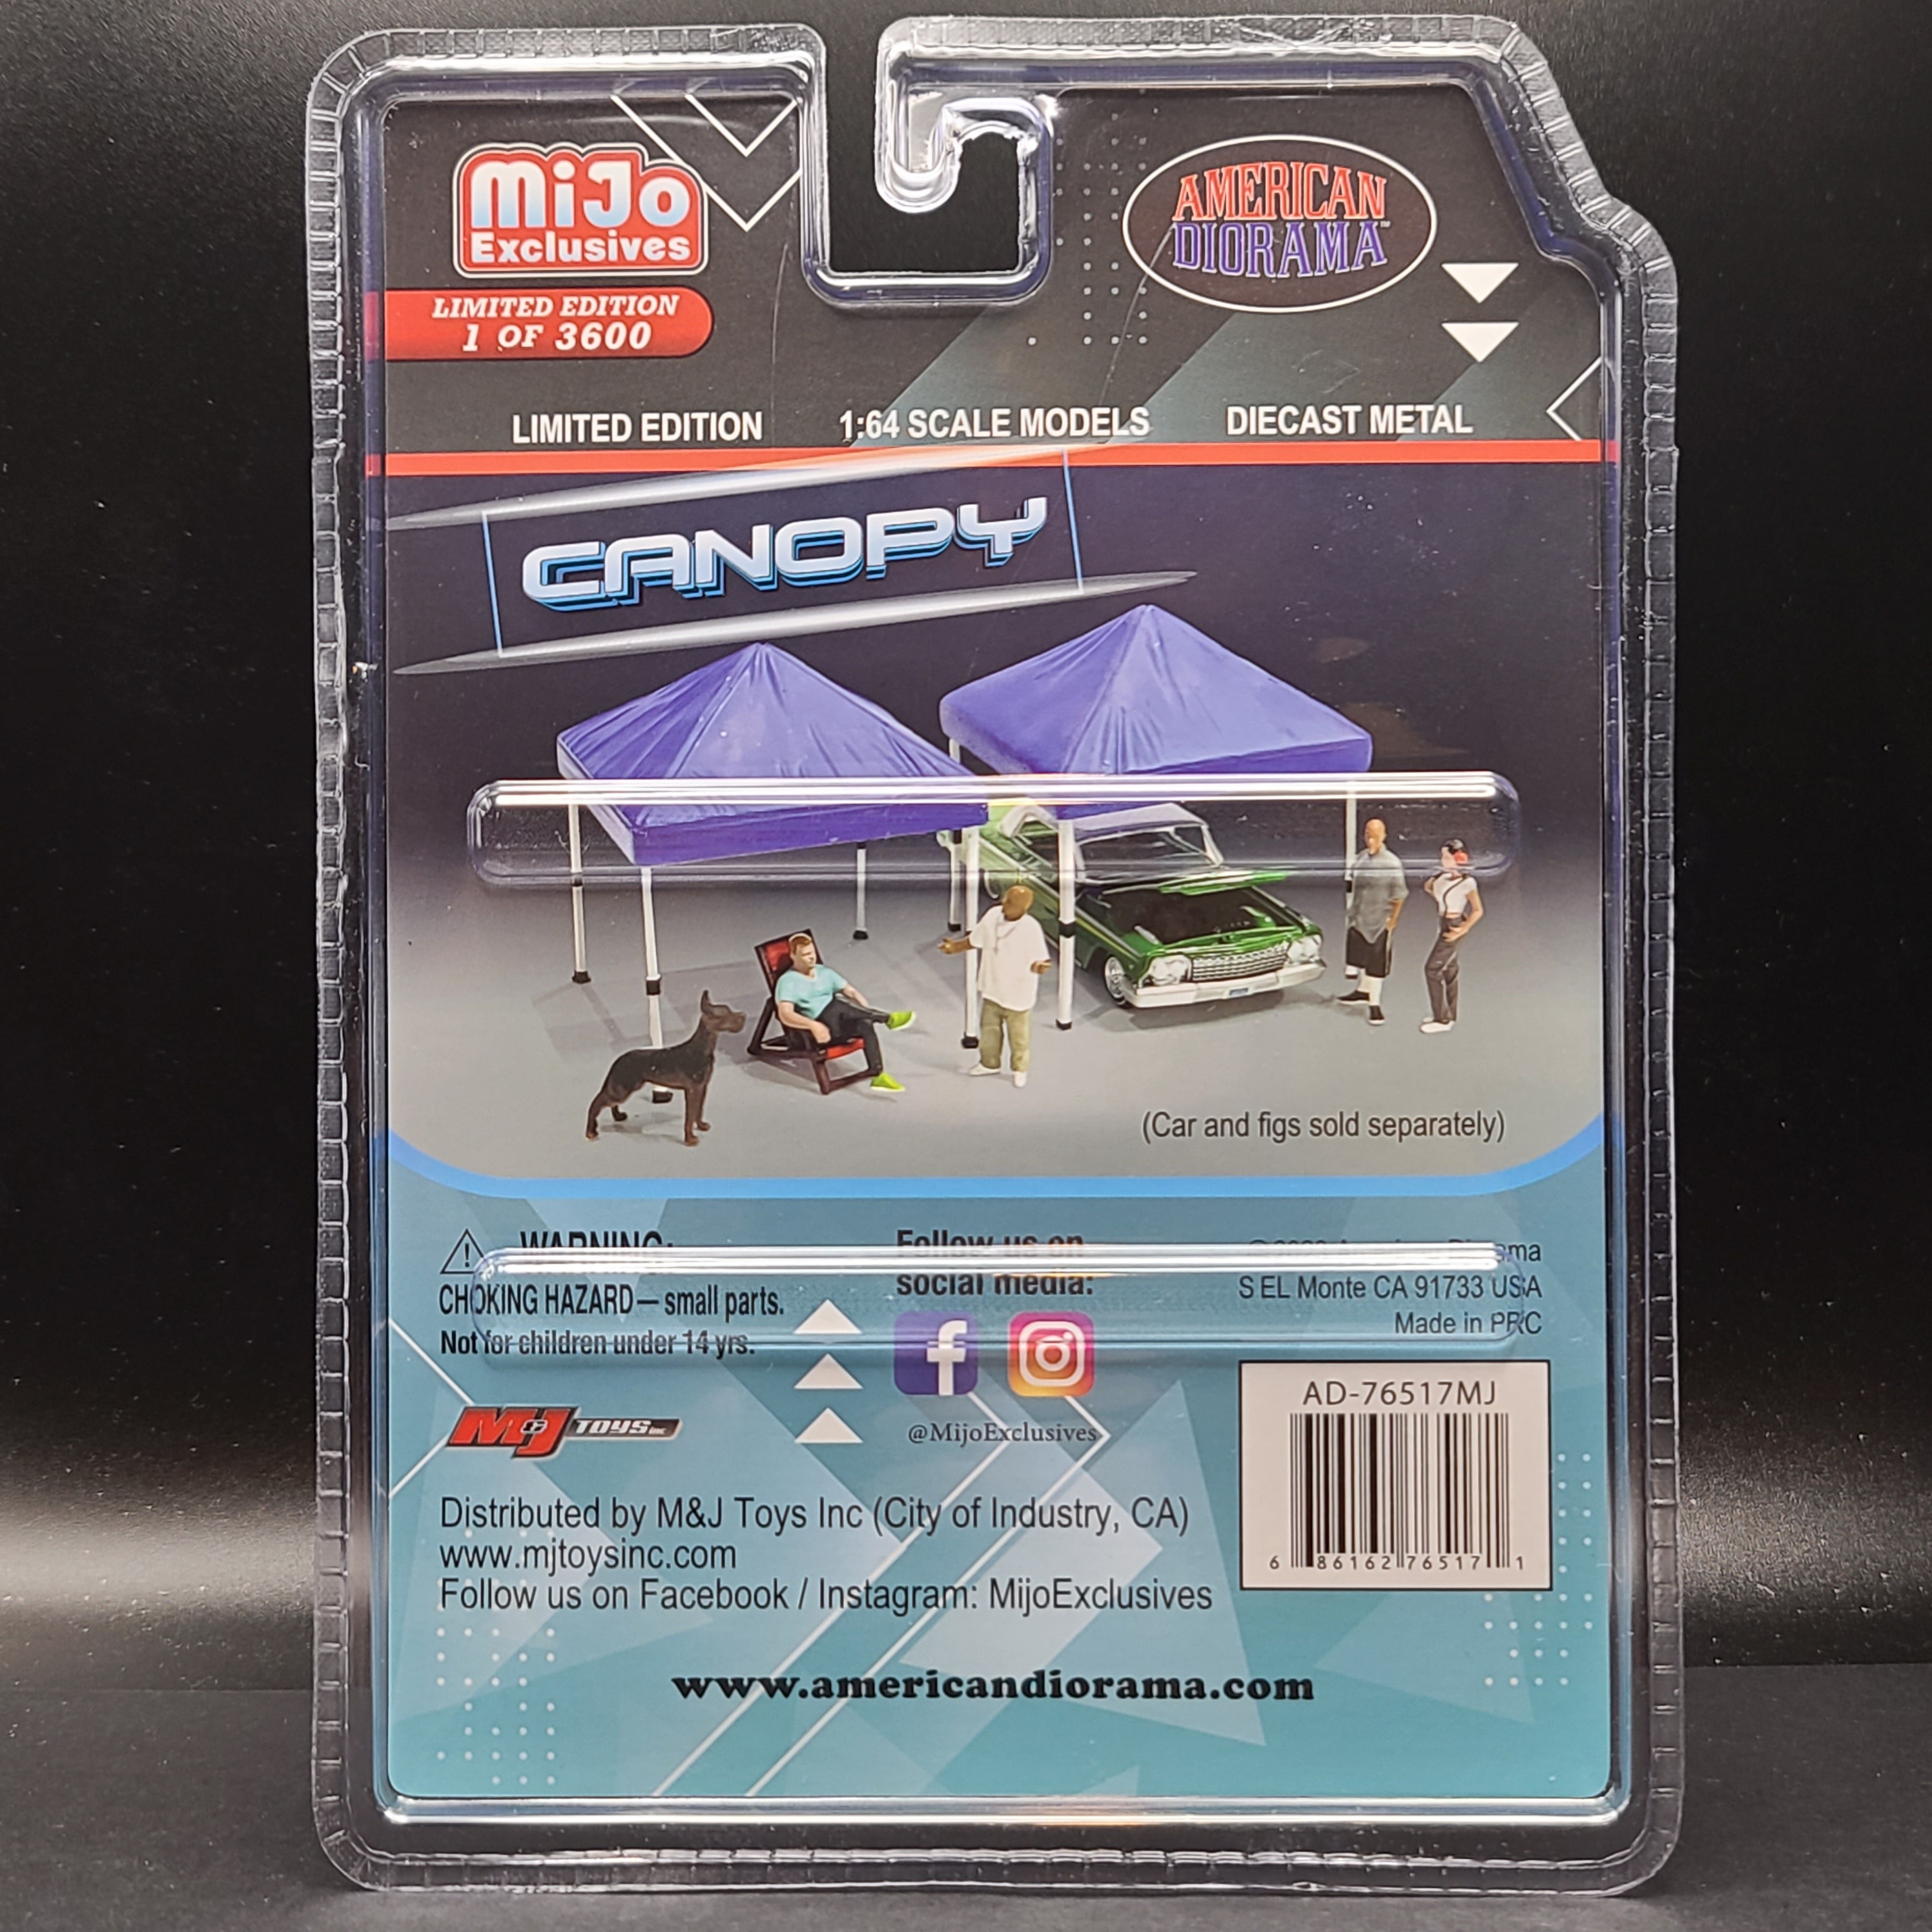 American Diorama - Canopy Tent Set of 2, 1:64 scale (2023 MiJo Exclusives - 1 of 3600)